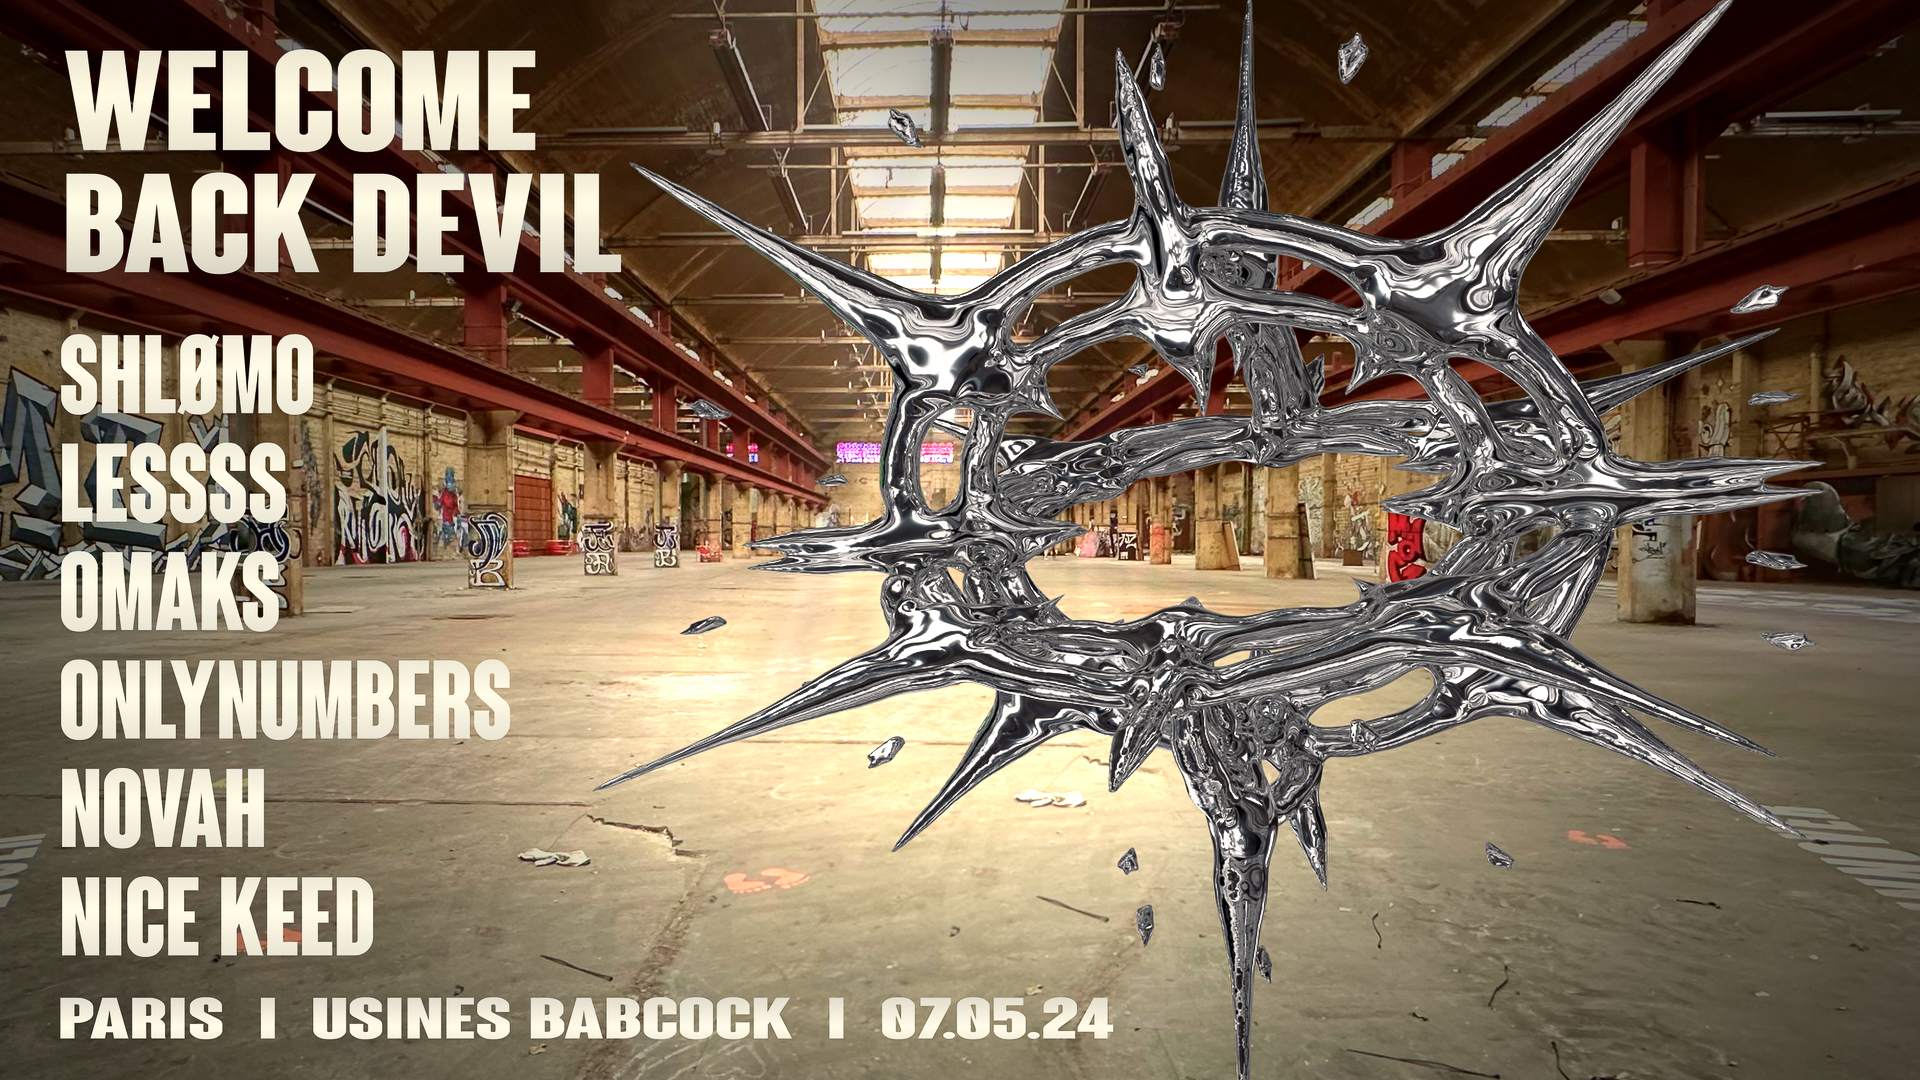 WELCOME BACK DEVIL • BABCOCK EDITION - フライヤー表